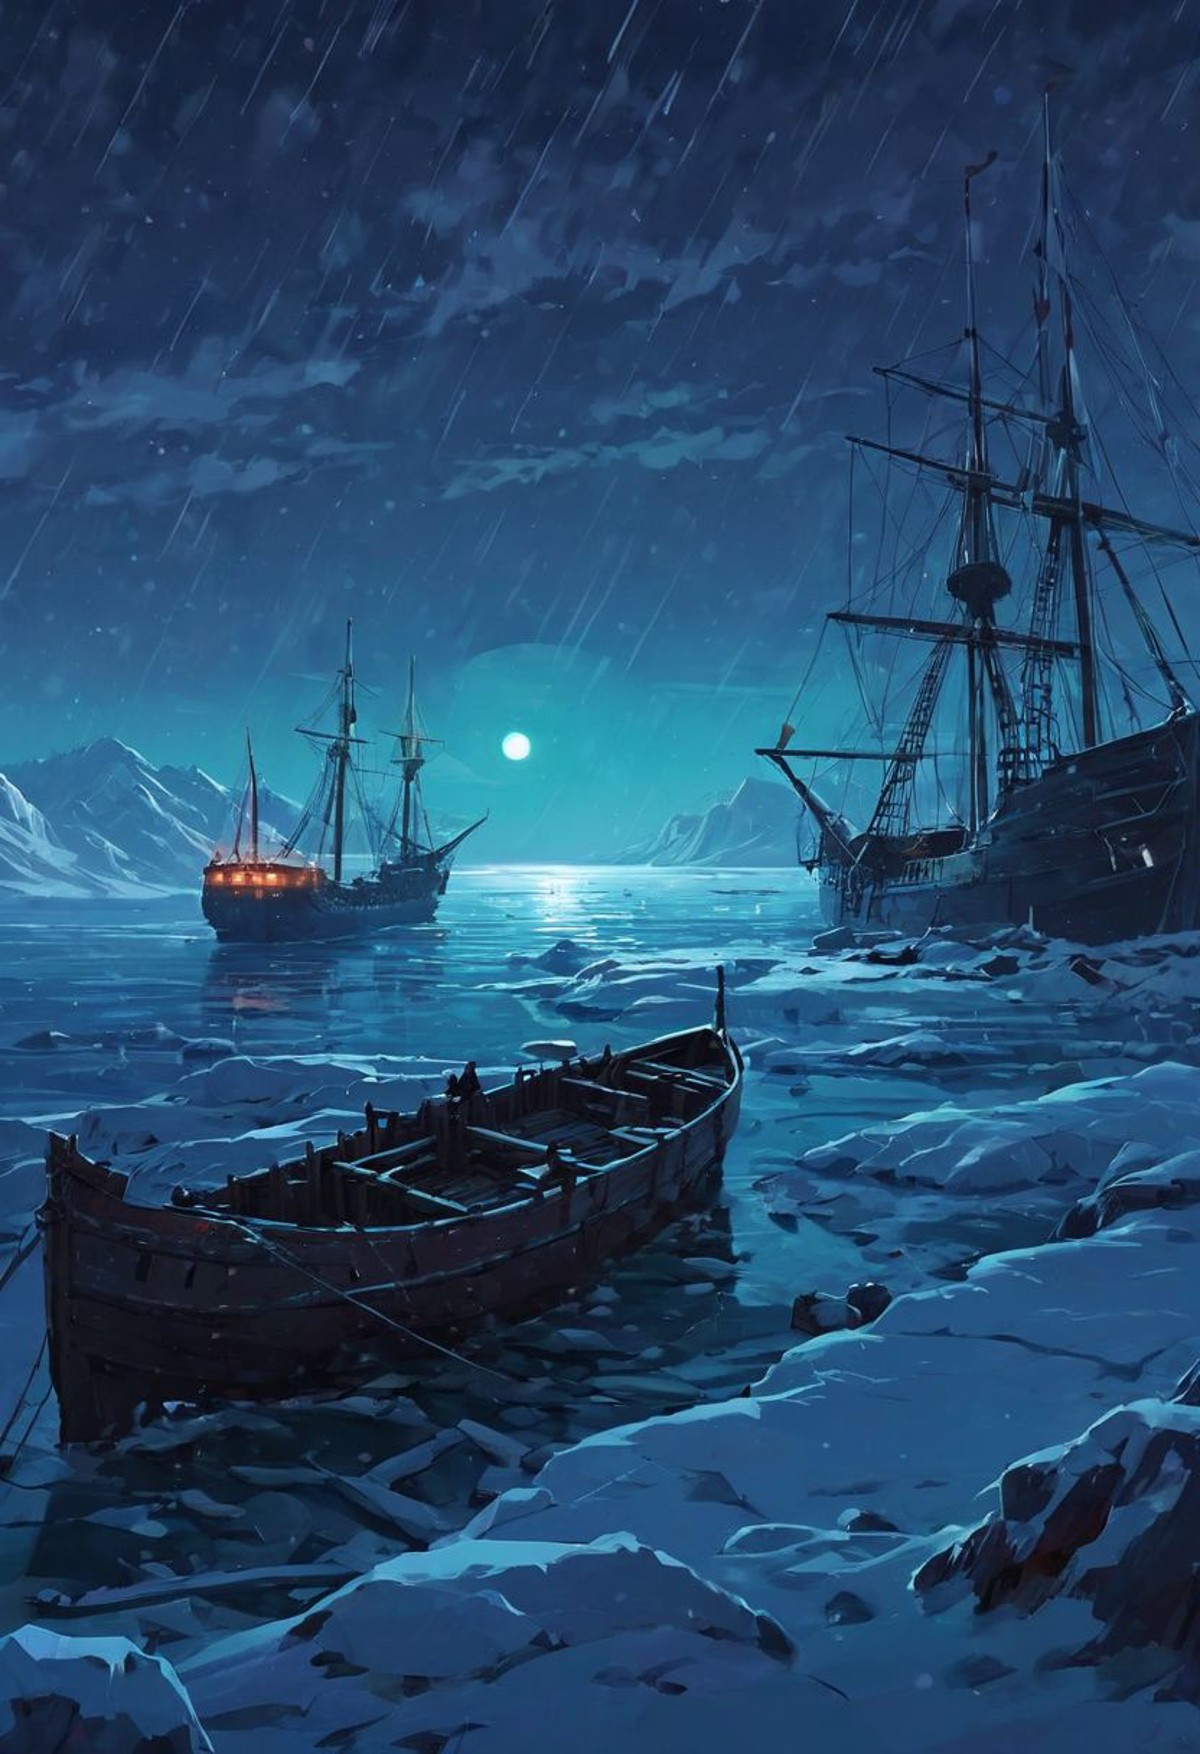 horror theme, dead of night, vast tundra, ships wrecked in the ice, "the terror", winter darkness, realistic, by Alena Aen...